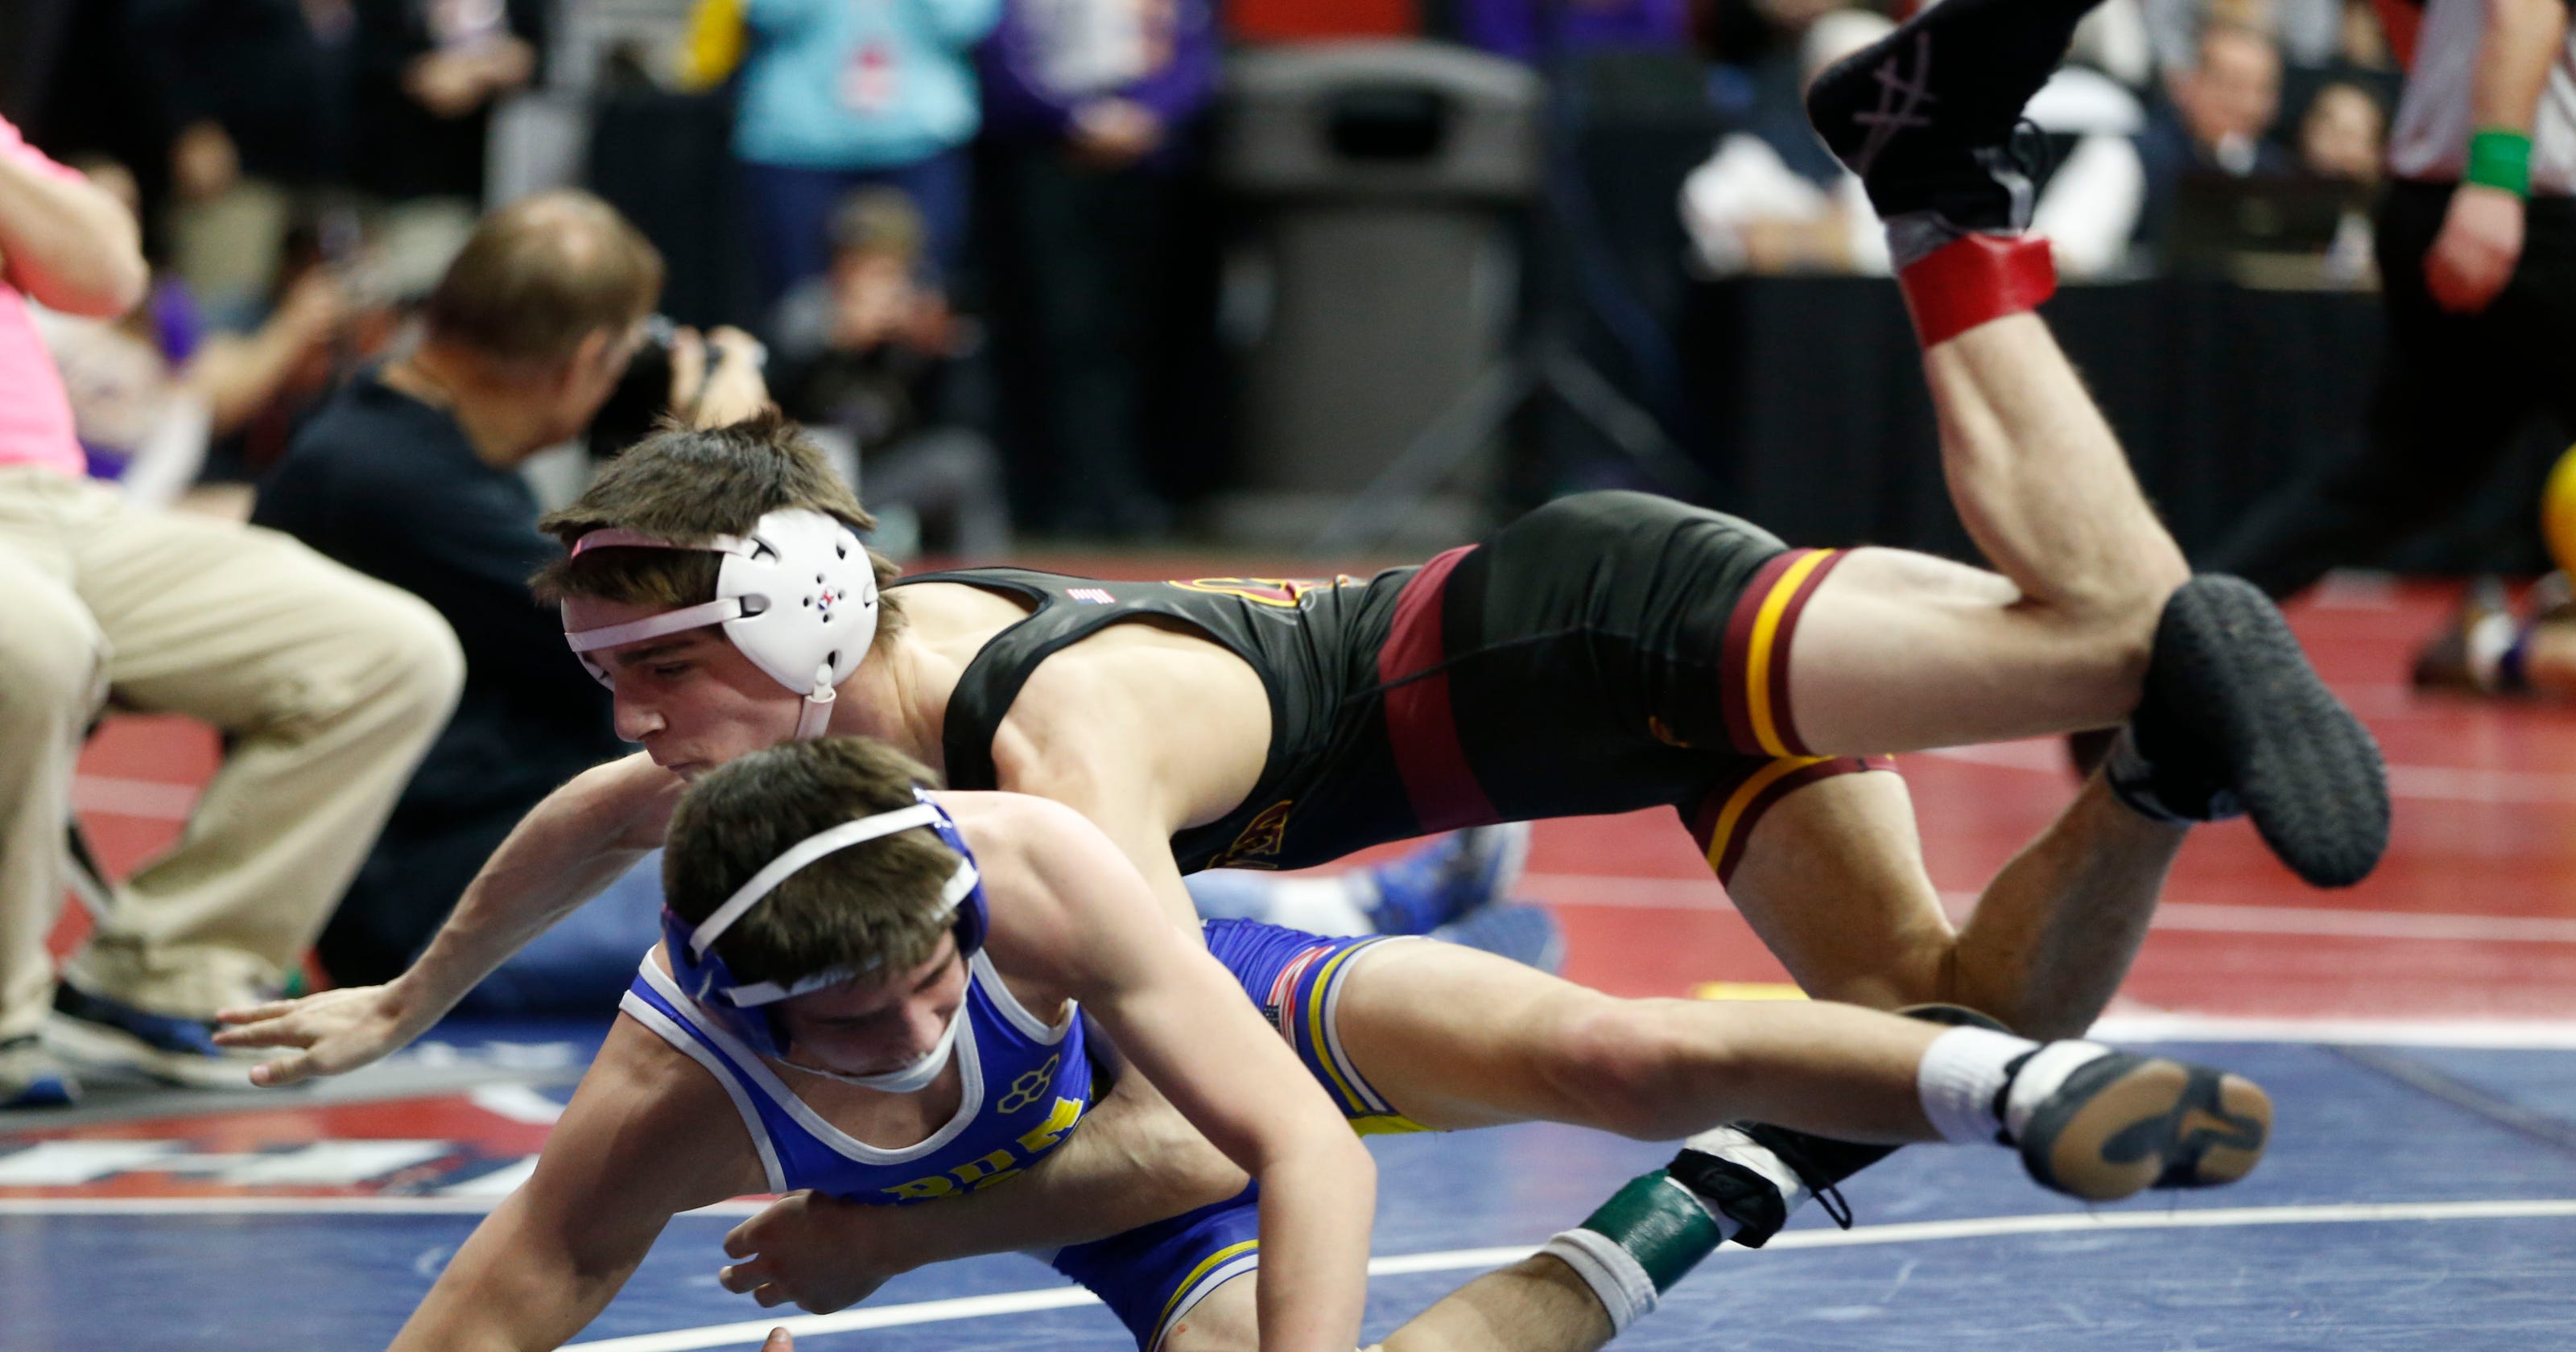 Iowa state wrestling championships Thursday live updates and analysis